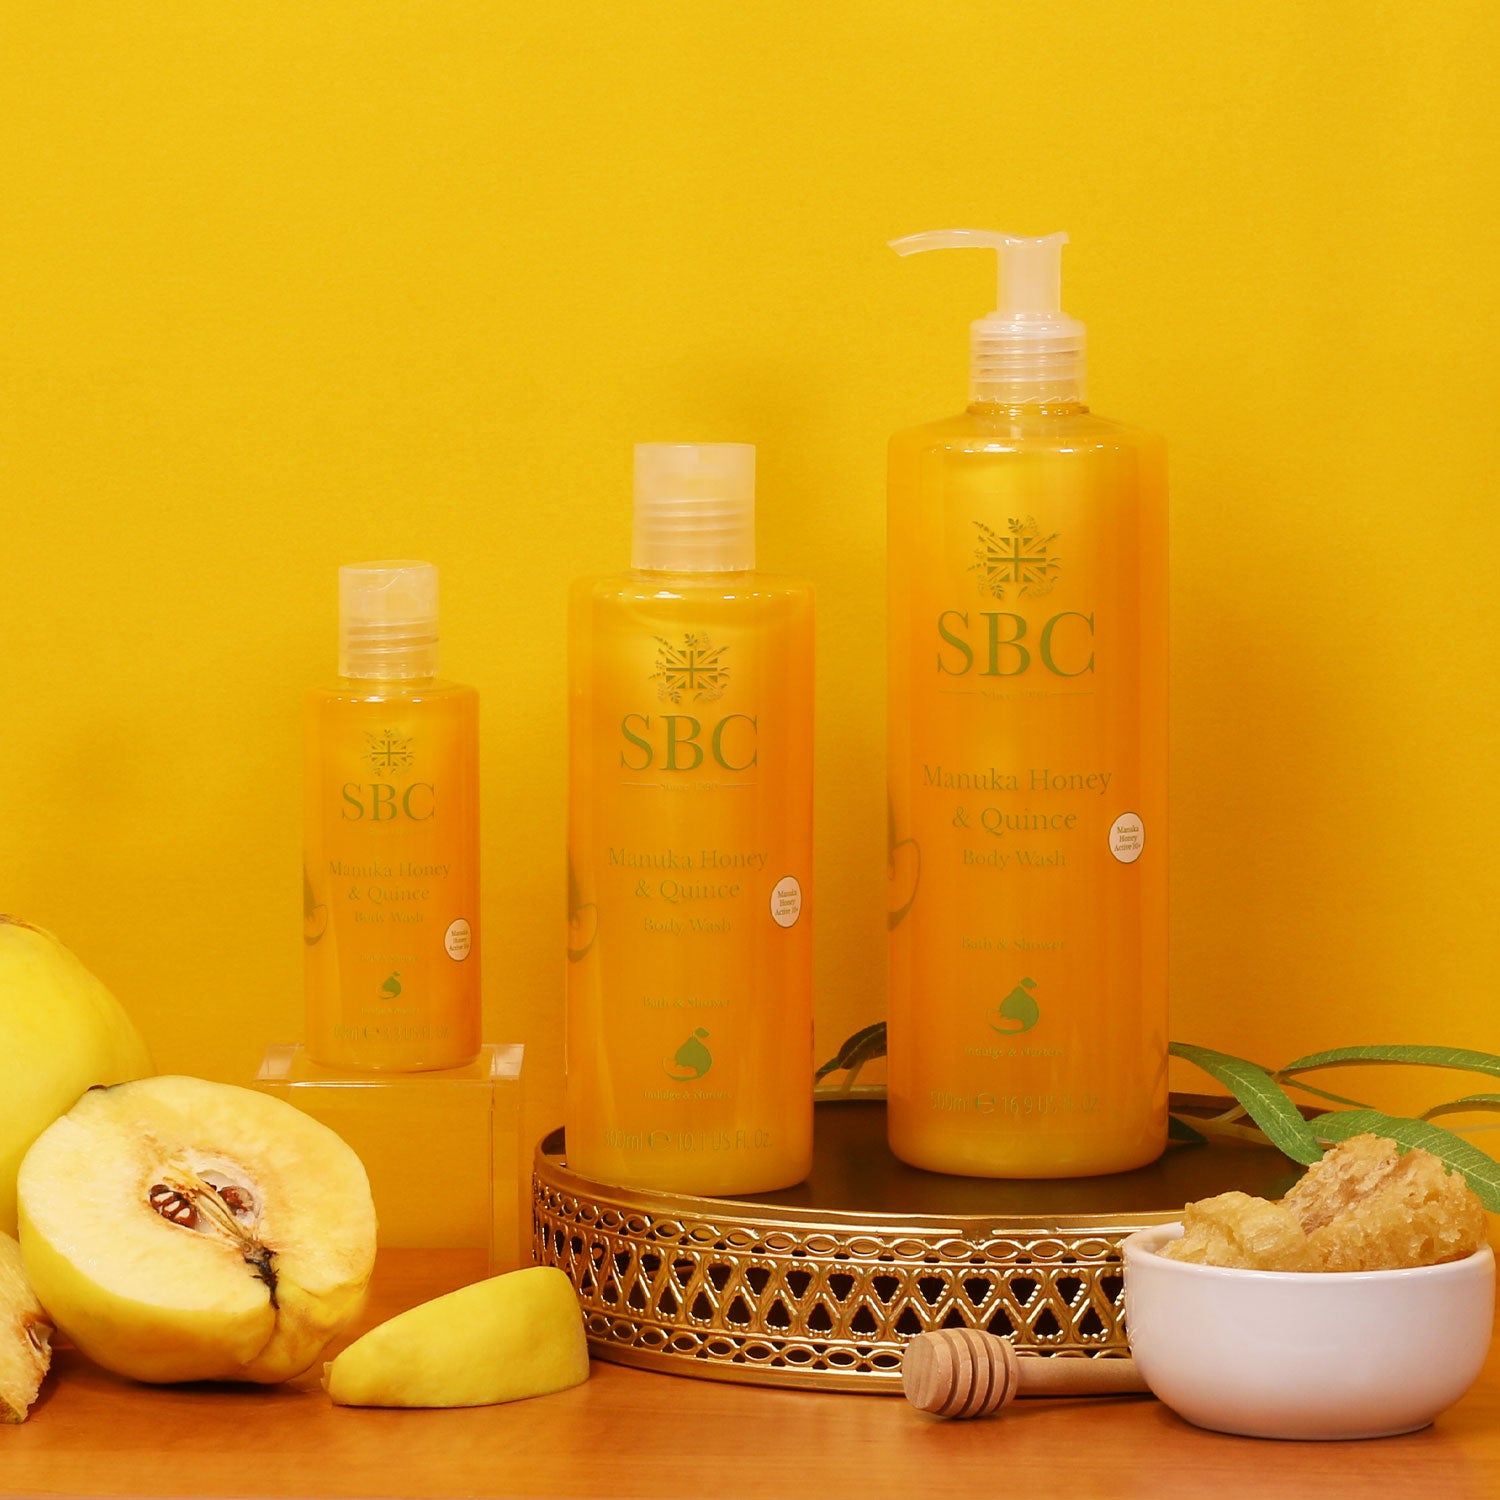 100ml, 300ml and 500ml Manuka Honey & Quince Body Washes on a golf tray with a bright orange background 